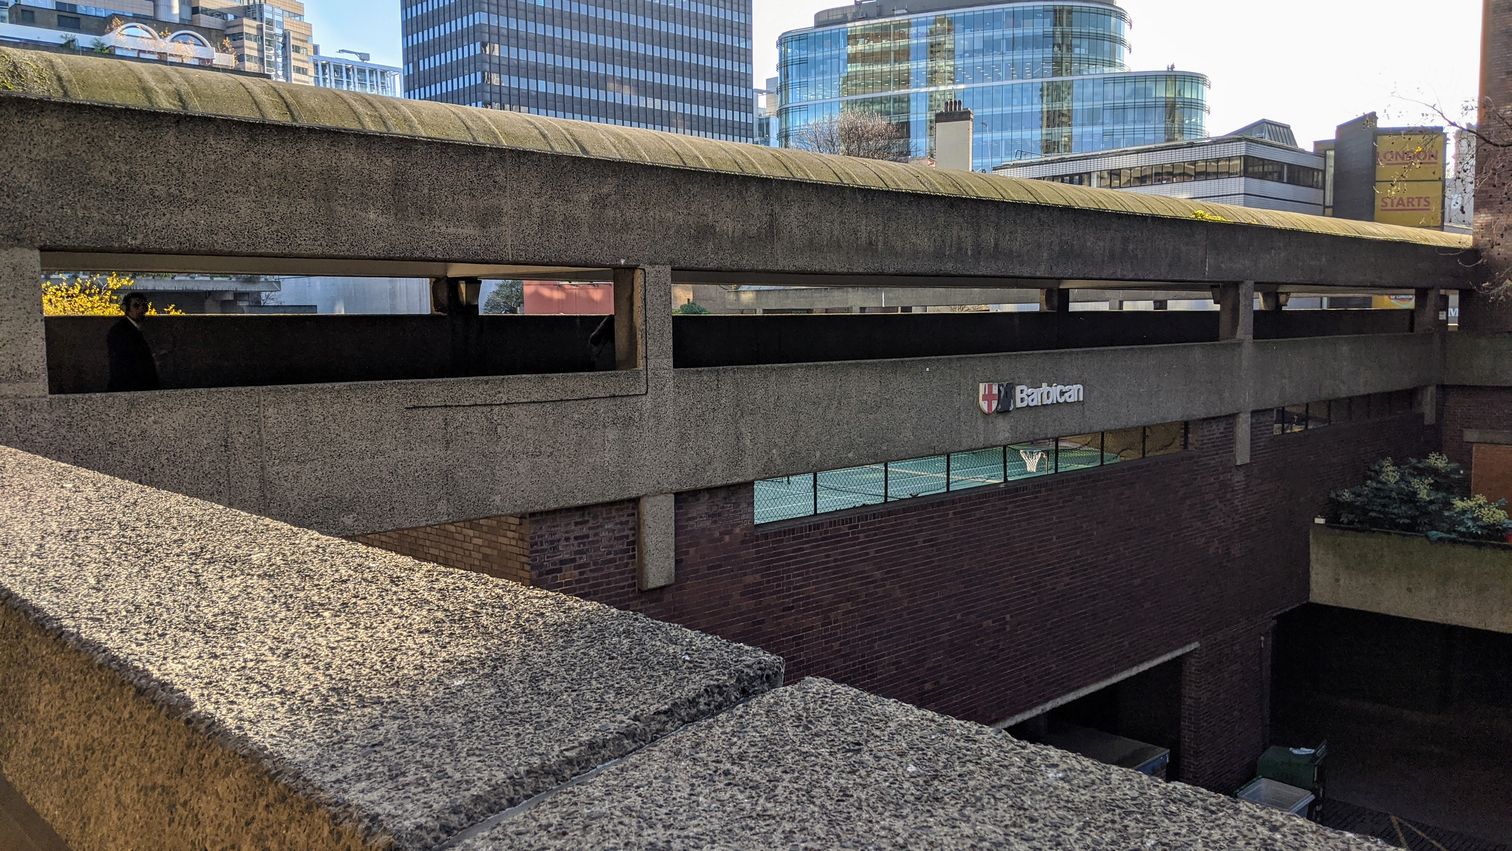 Section of pedway at the Barbican estate